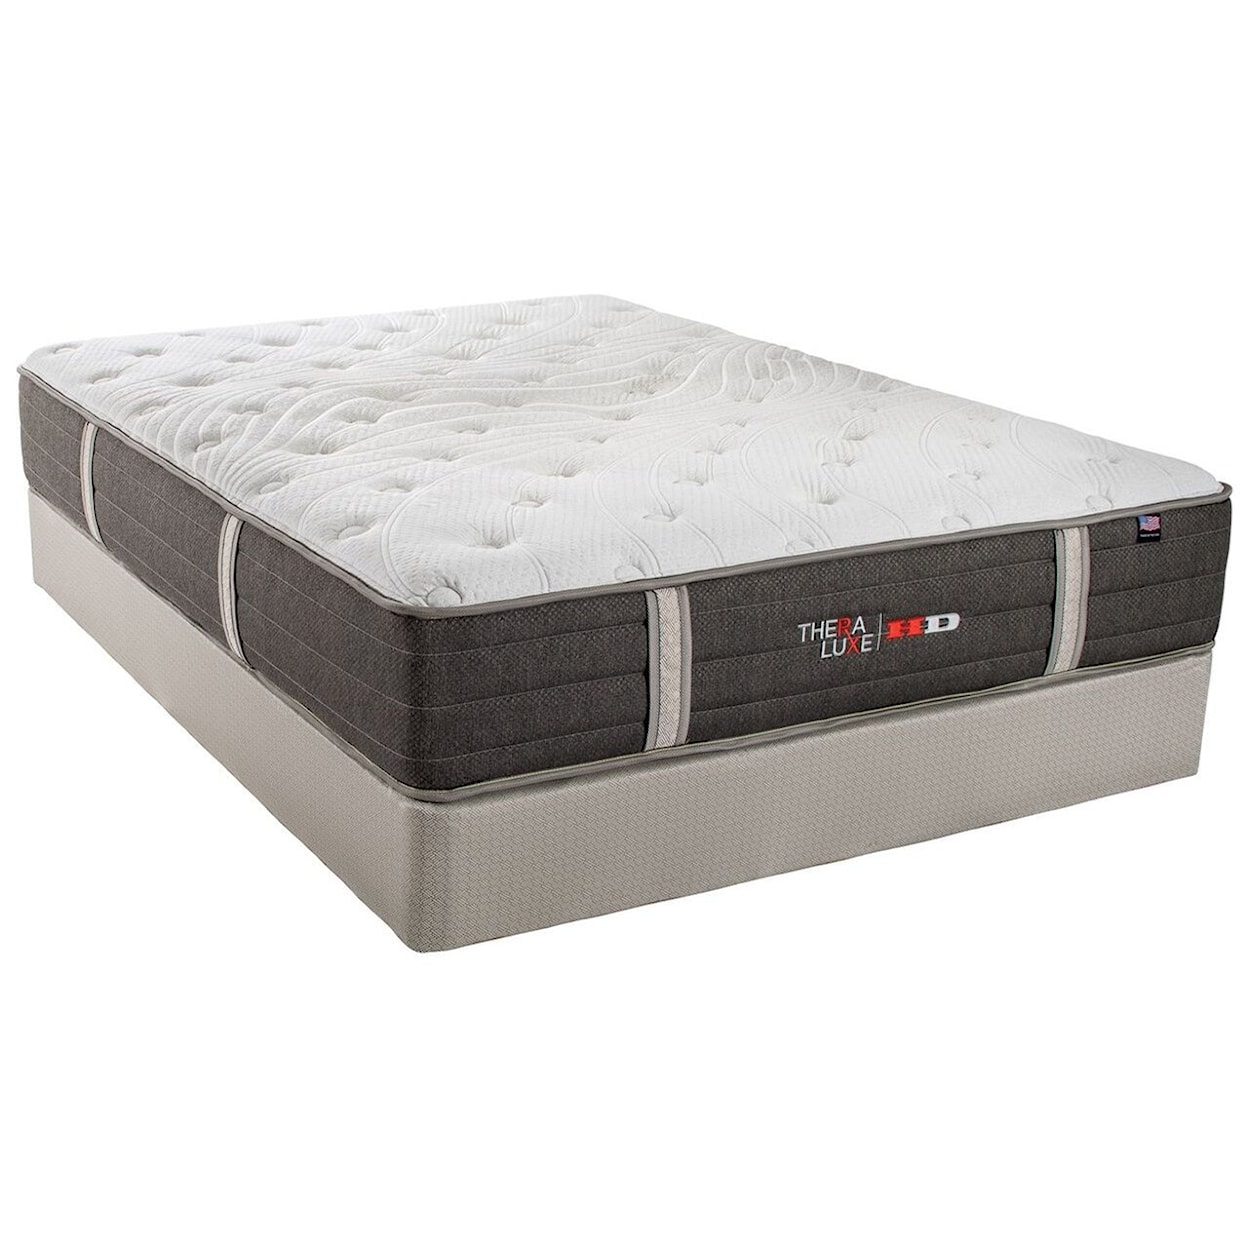 Therapedic Thera Luxe HD Balsam King Firm Pocketed Coil Mattress Set